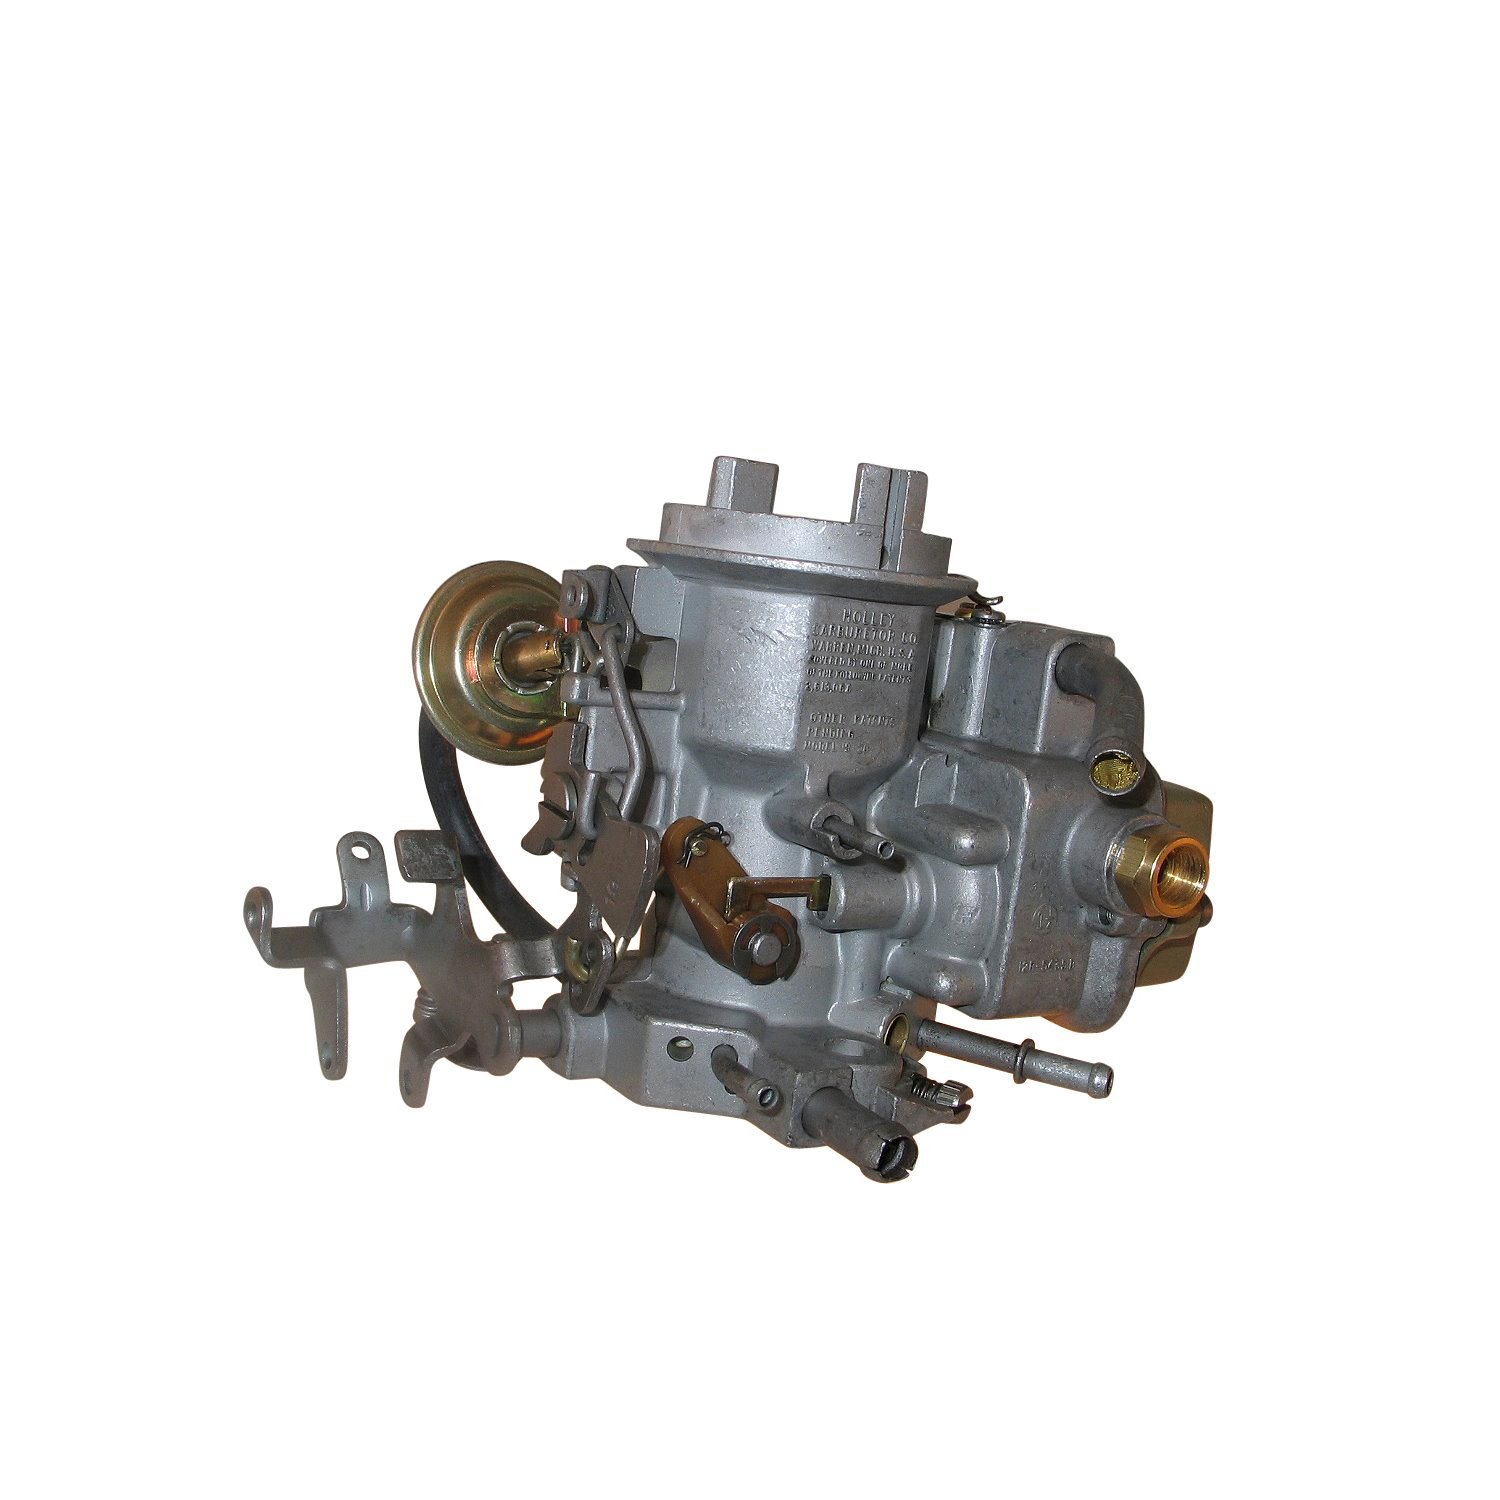 6-6190 Holley Remanufactured Carburetor, 1920-Style